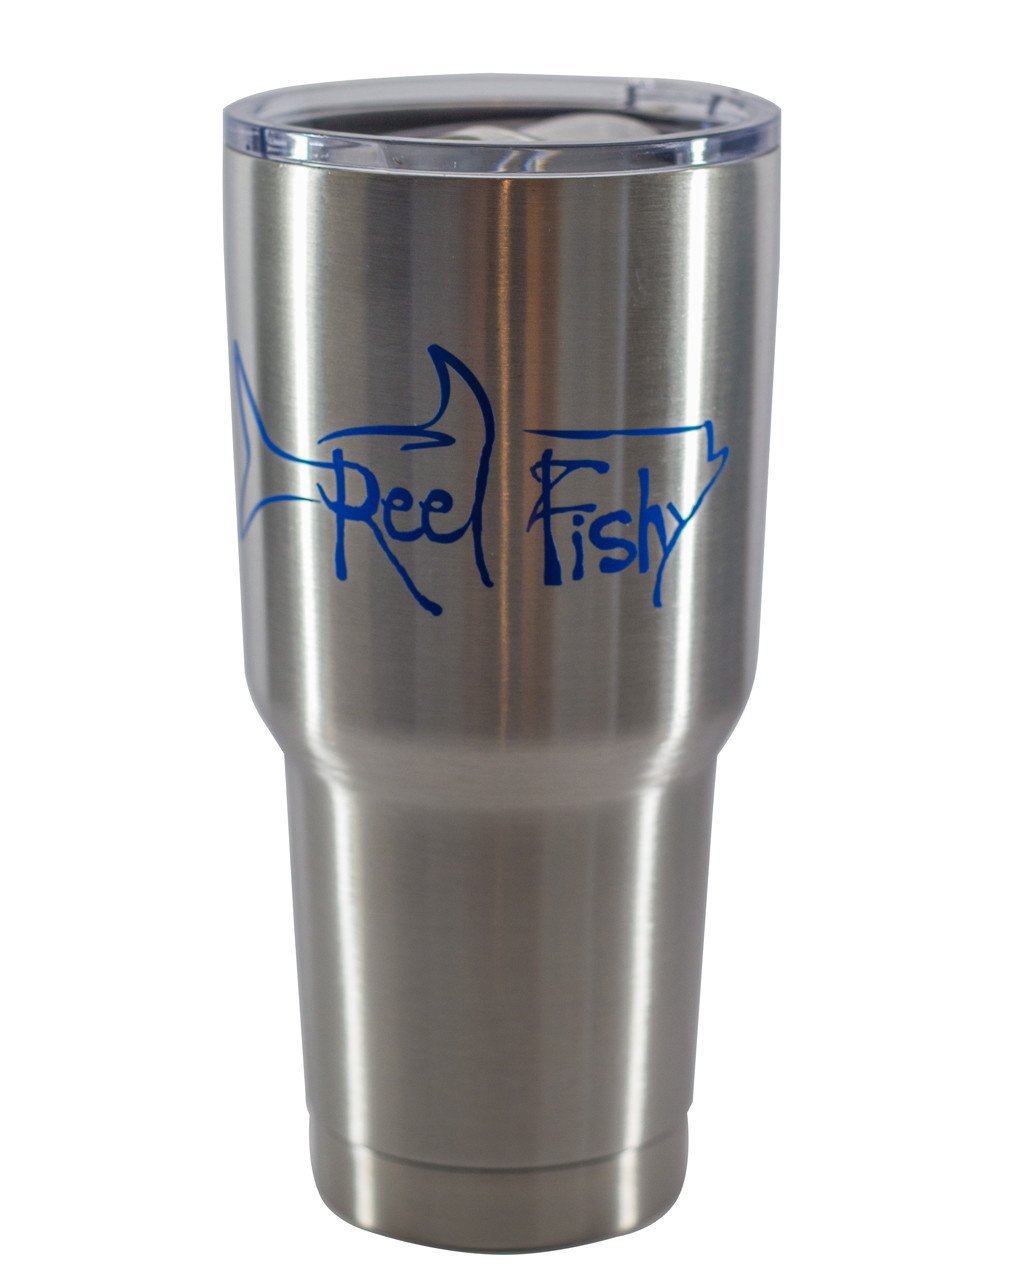 22oz Stainless Steel Tumbler with Tarpon decal - Comparable to Yeti & –  Reel Fishy Apparel